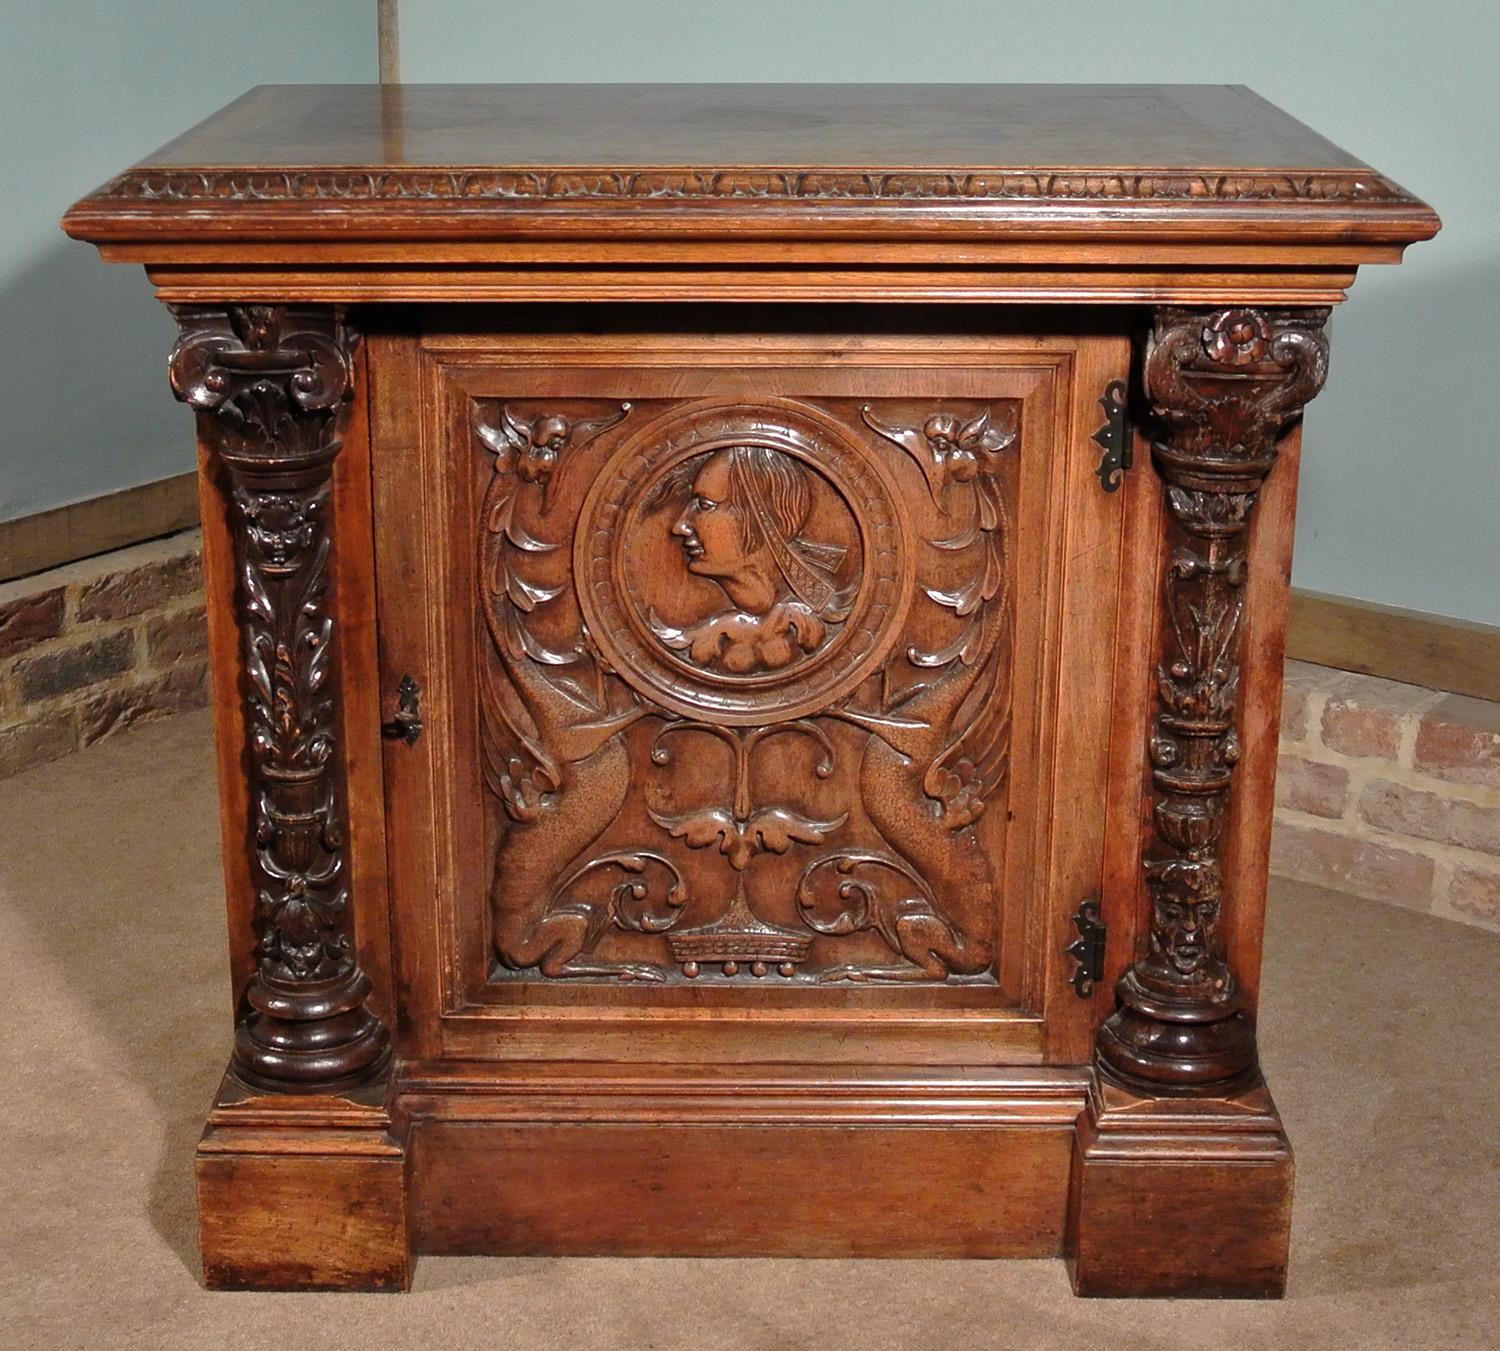 An unusual 19th century solid walnut cupboard incorporating four 16th century carved elements, possibly taken from a Late Medieval Aumbry and including an exceptionally rare and important early 16th century carved walnut panel featuring a pair of